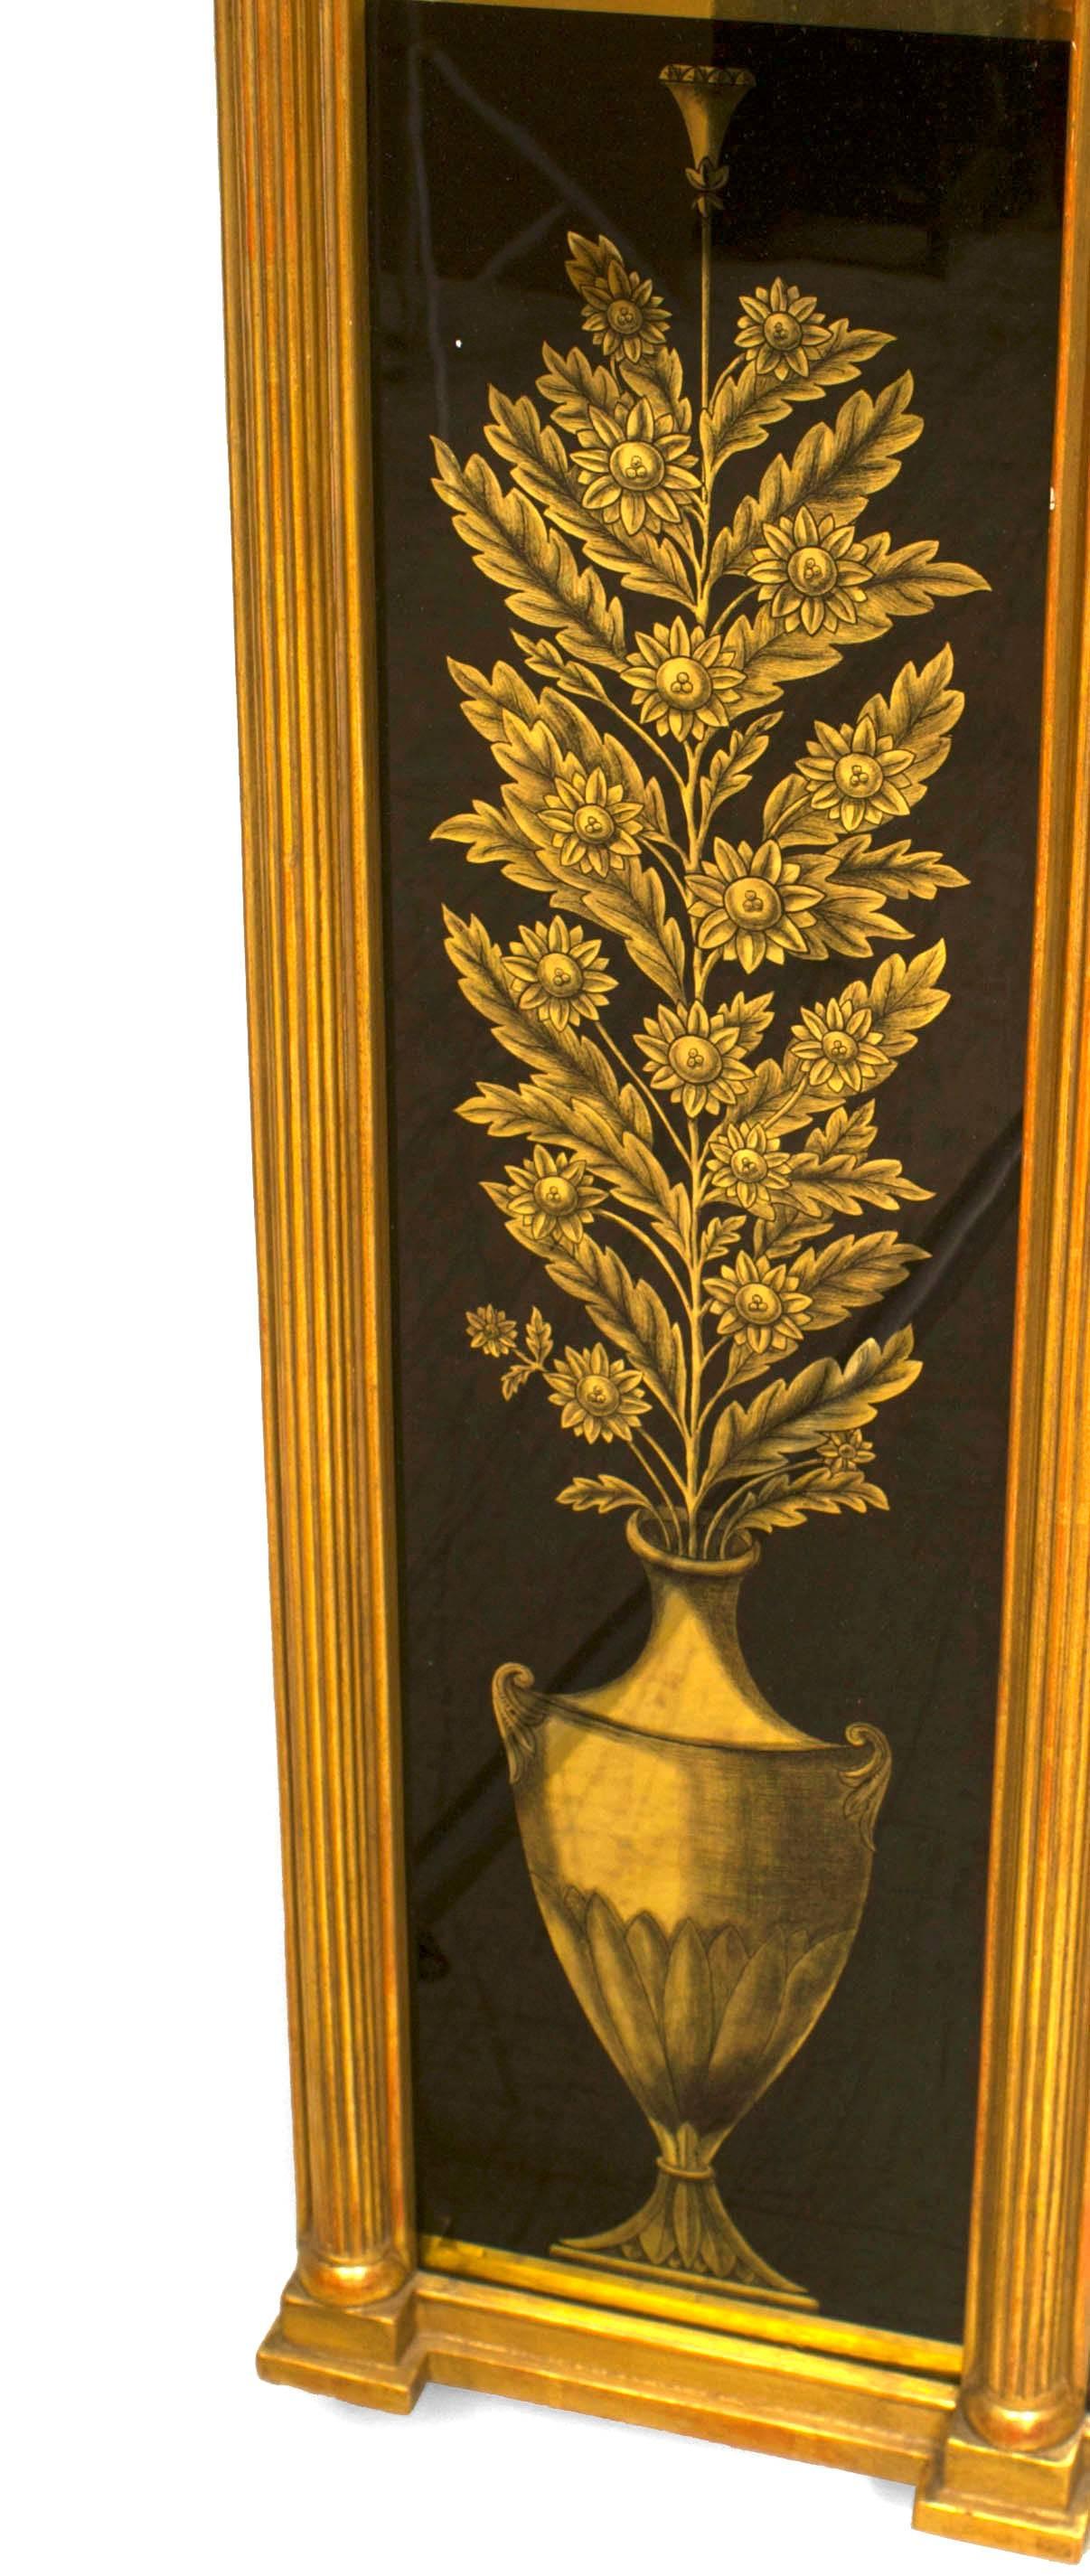 Italian Neoclassic Gilt Wall Mirror with Reverse Glass Panels In Good Condition For Sale In New York, NY